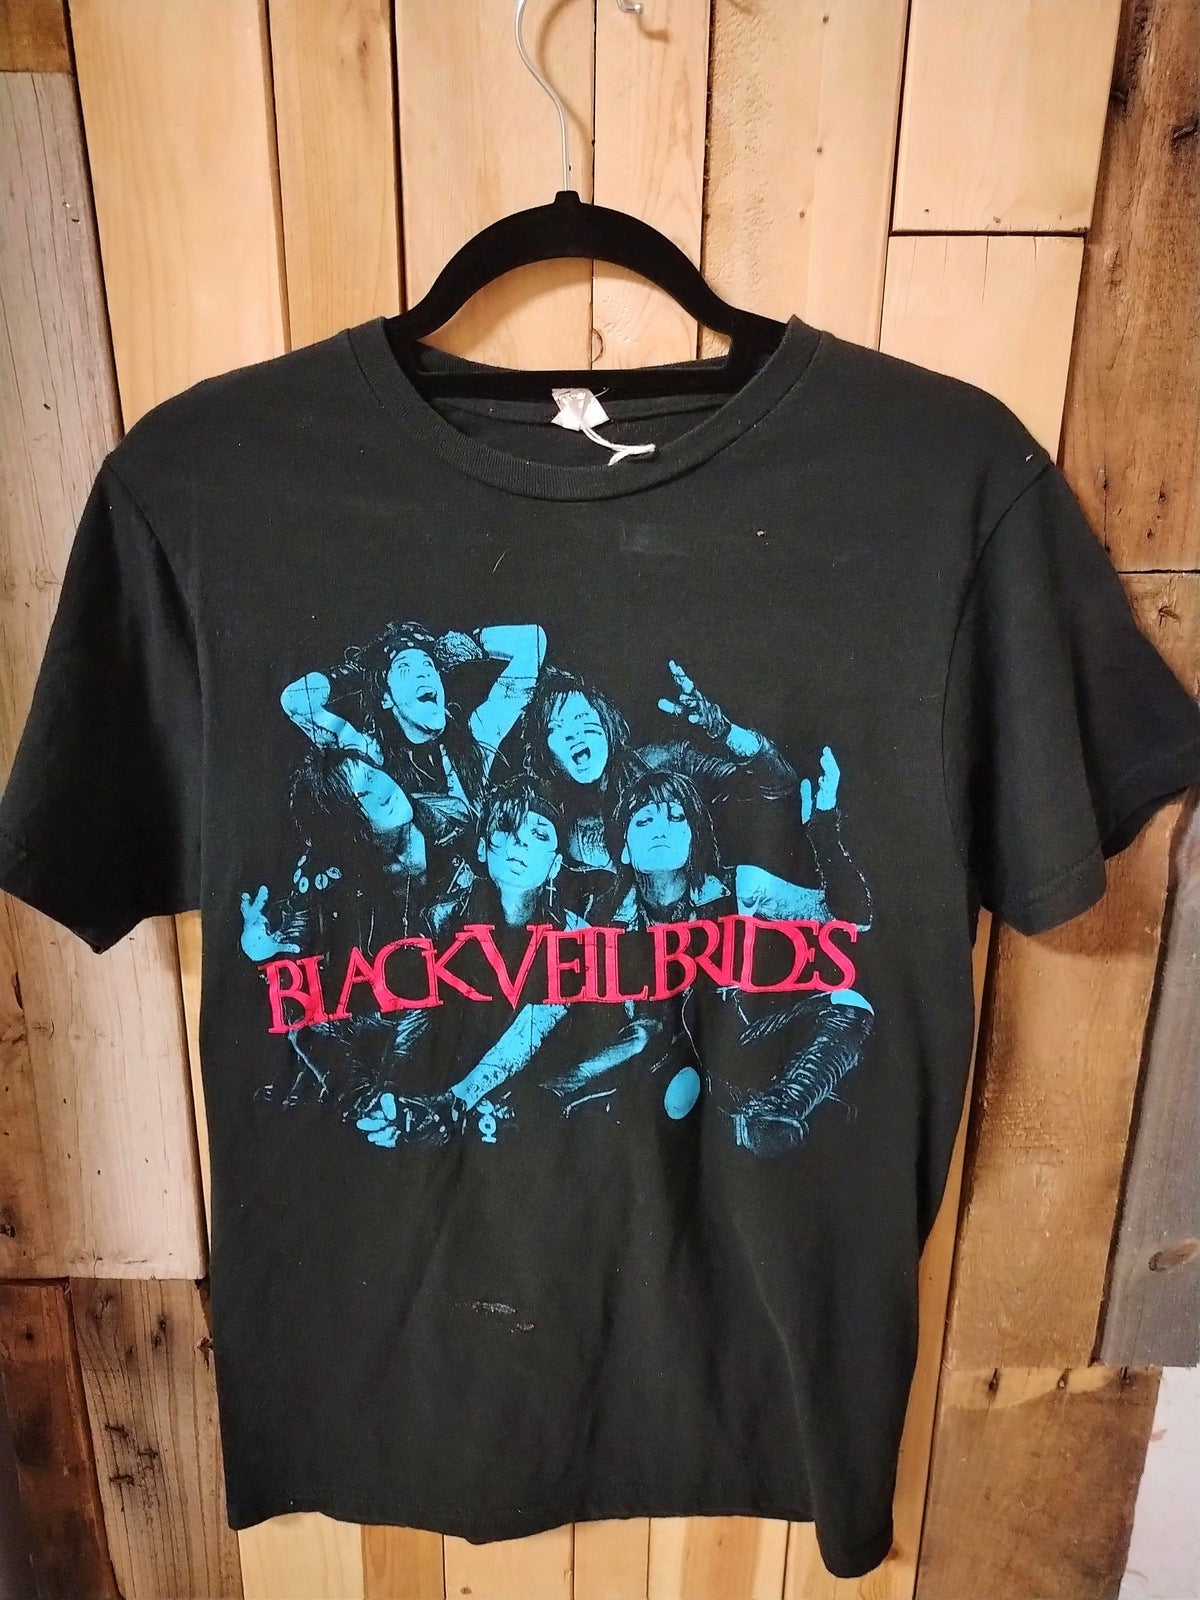 Black Veil Brides Size Medium As Is- Light Stains on Front